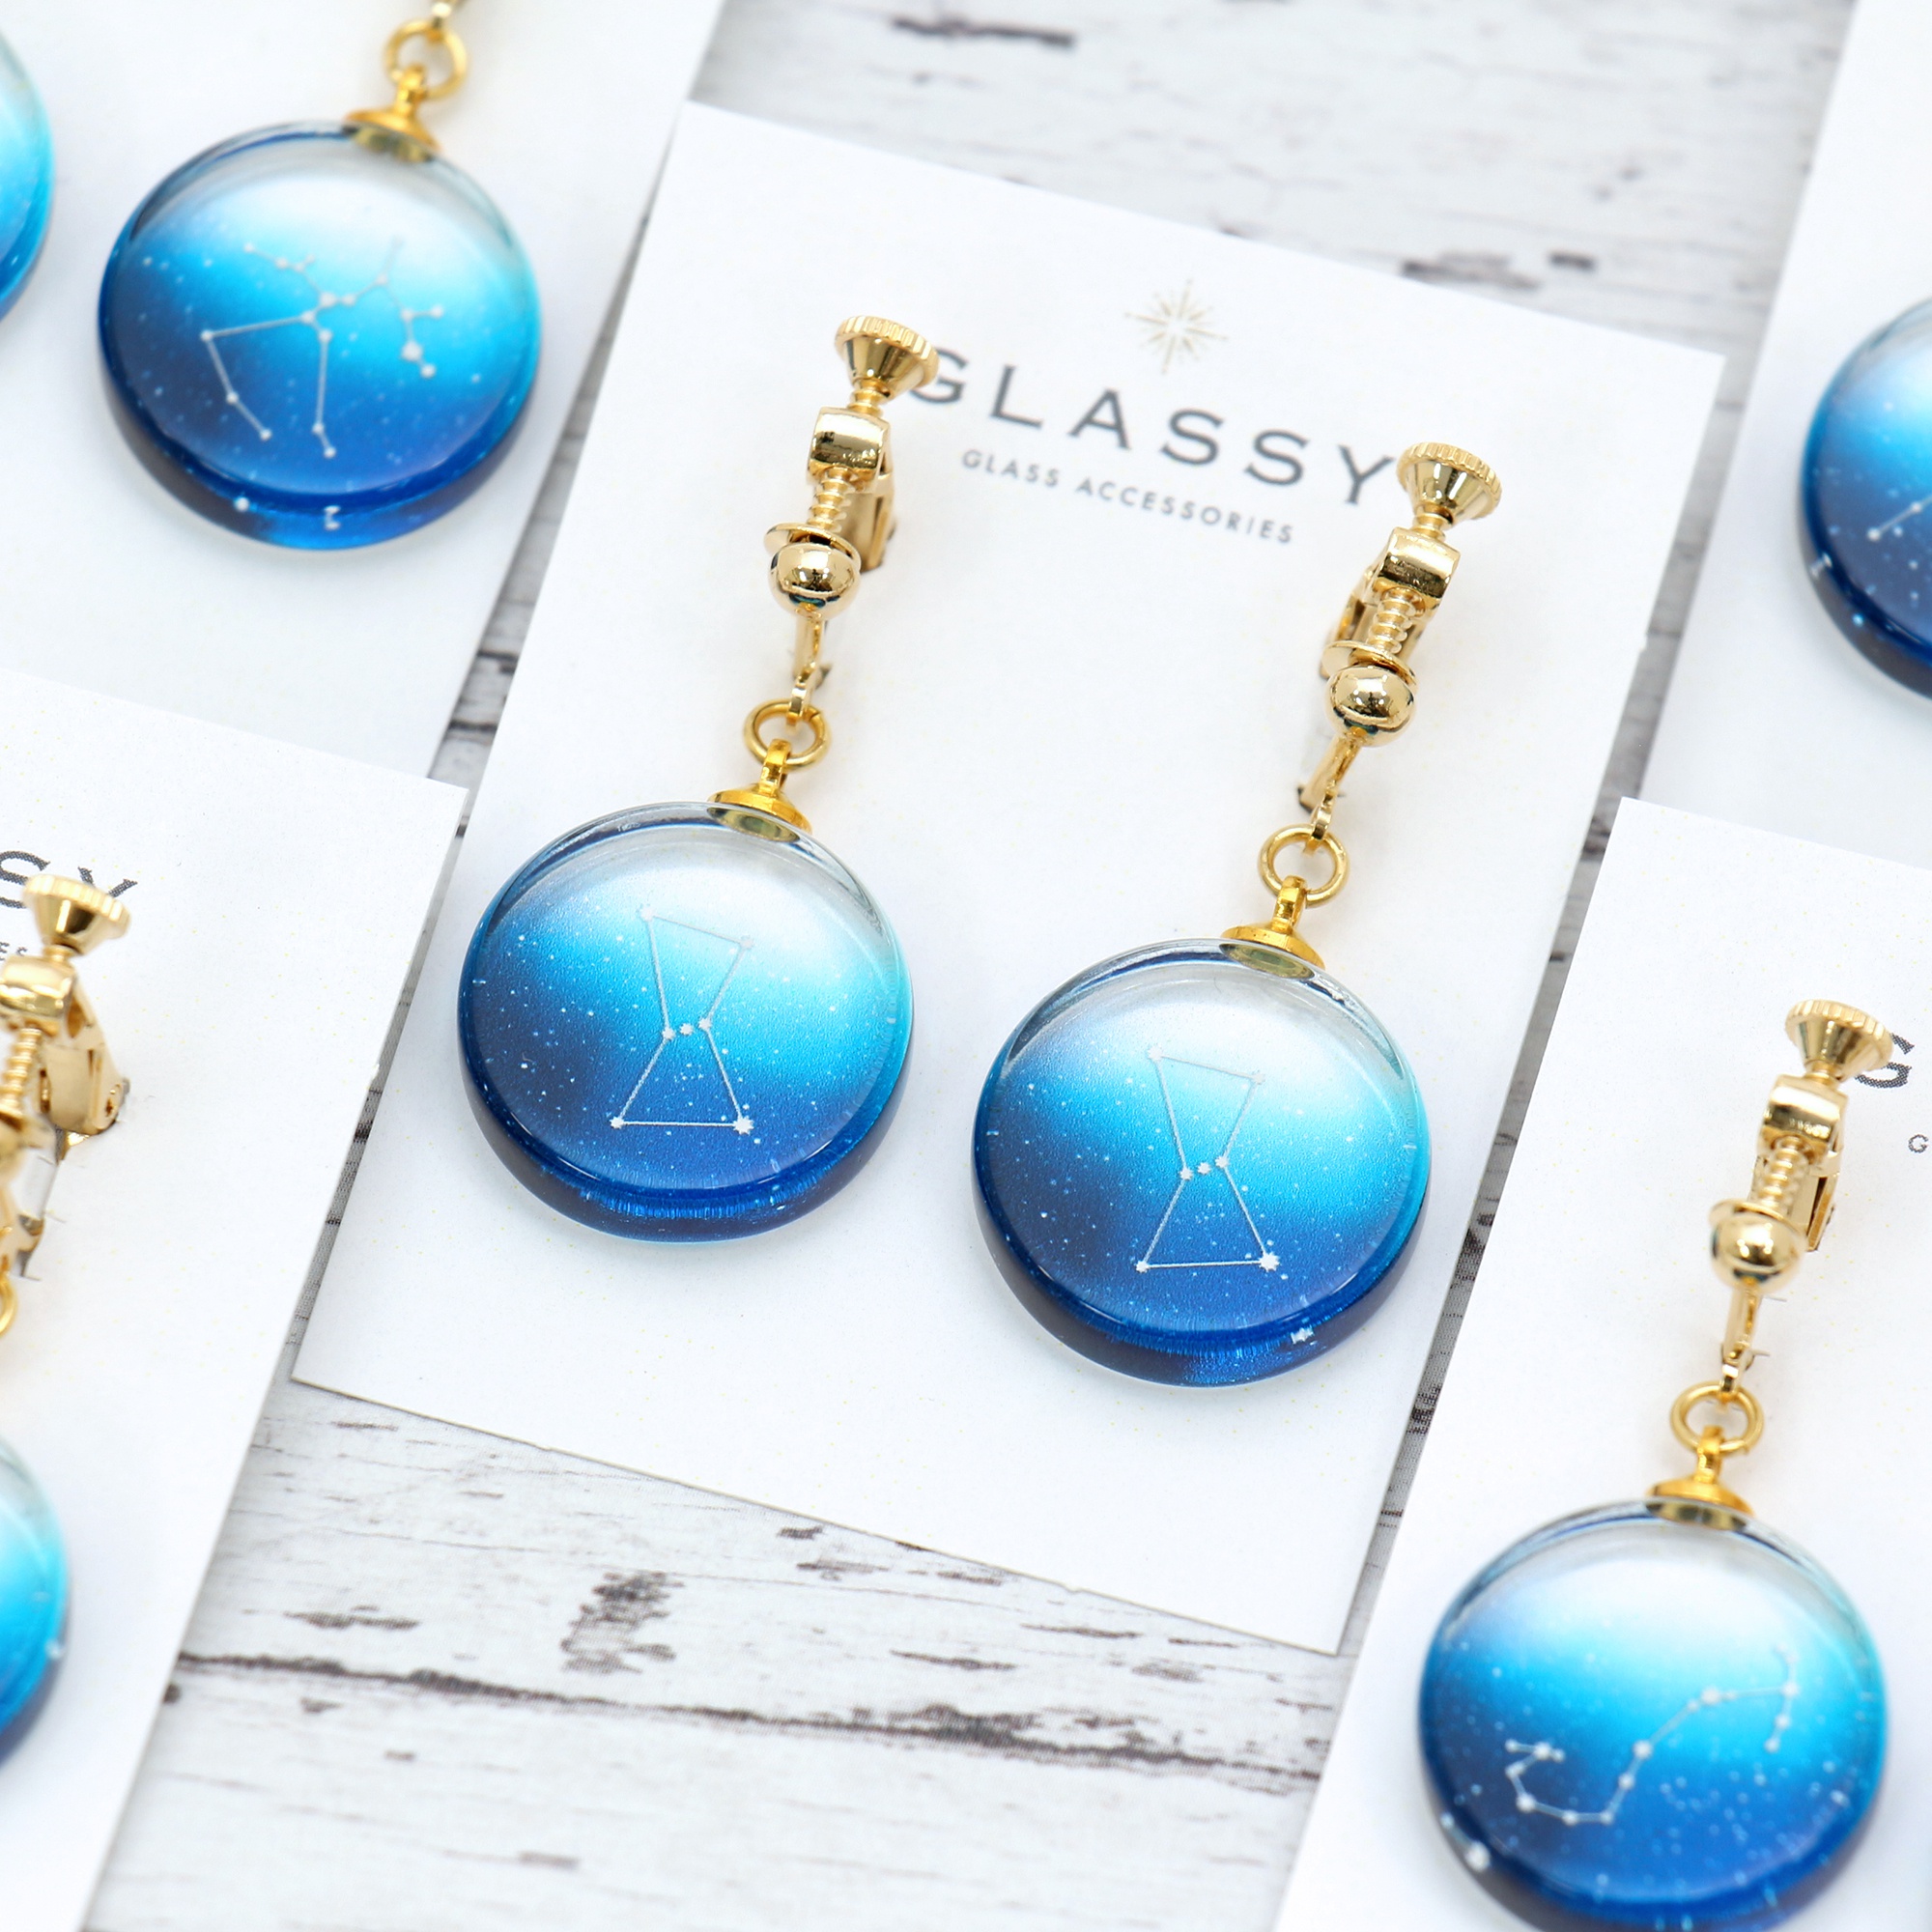 Glass accessories Earring CONSTELLATION Southern Cross round shape